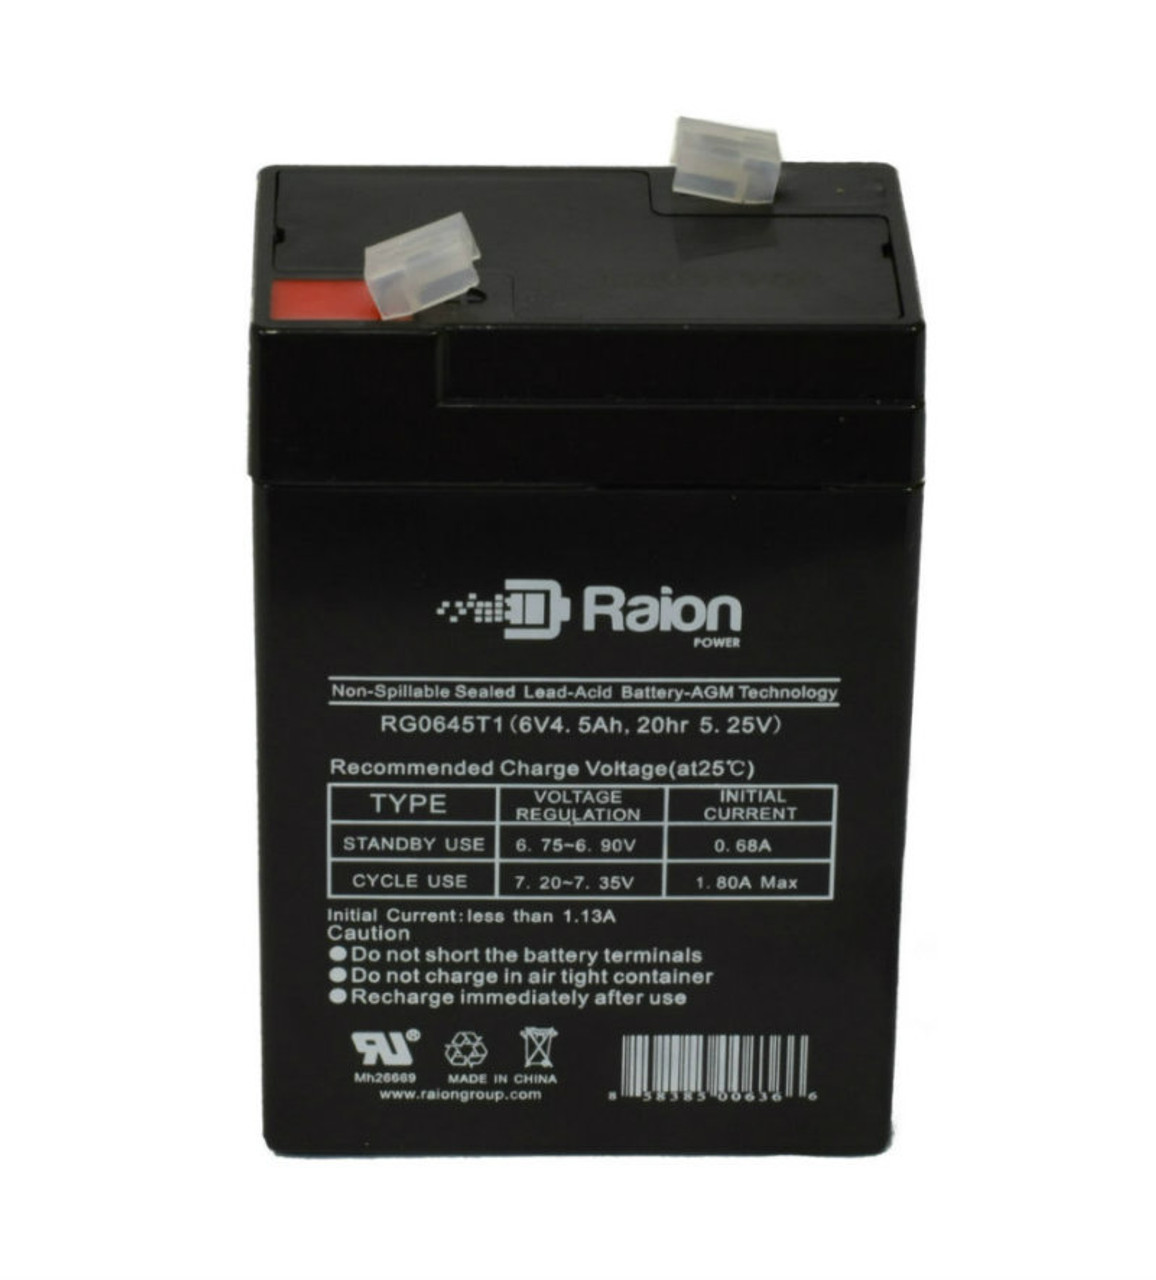 Raion Power RG0645T1 Replacement Battery Cartridge for American Hospital Supply Microrate Infusion Pump